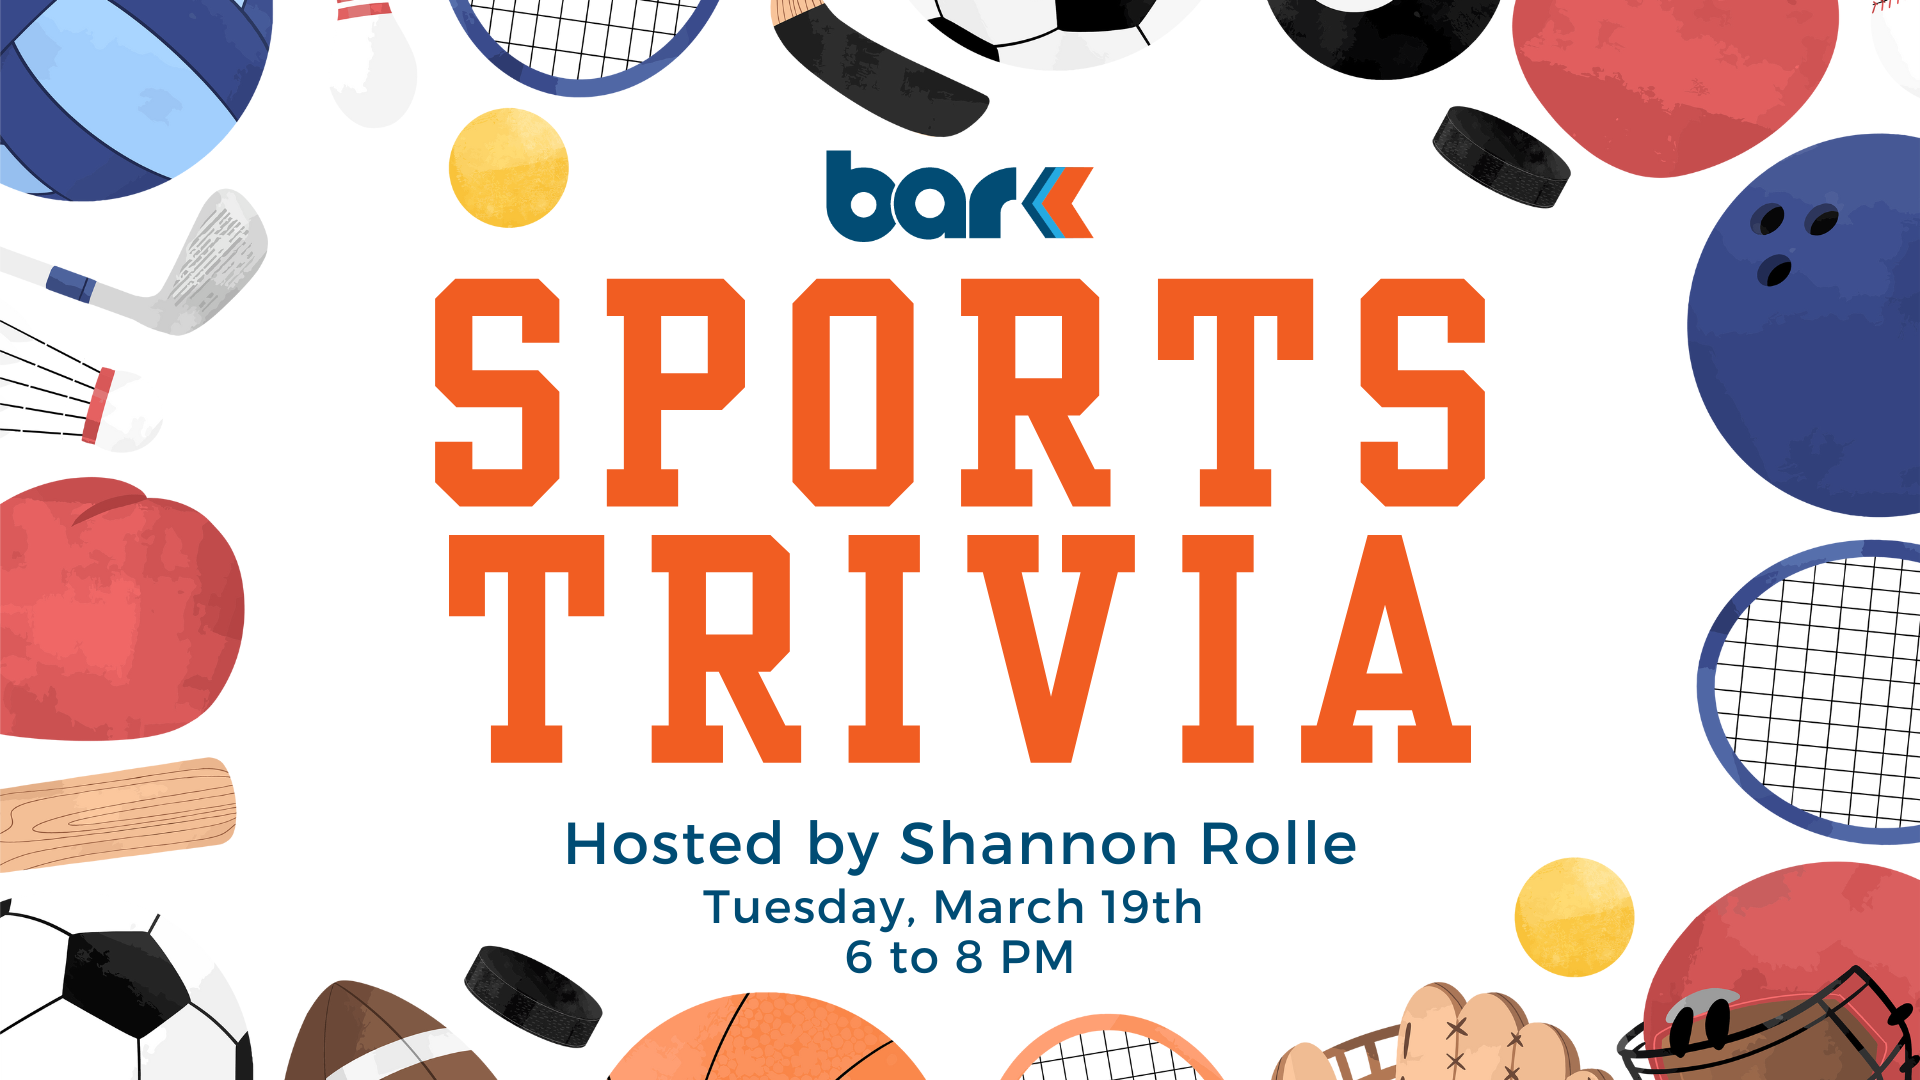 Sports Trivia hosted by Shannon Rolle at Bar K. Tuesday, March 19th from 6 to 8 pm.